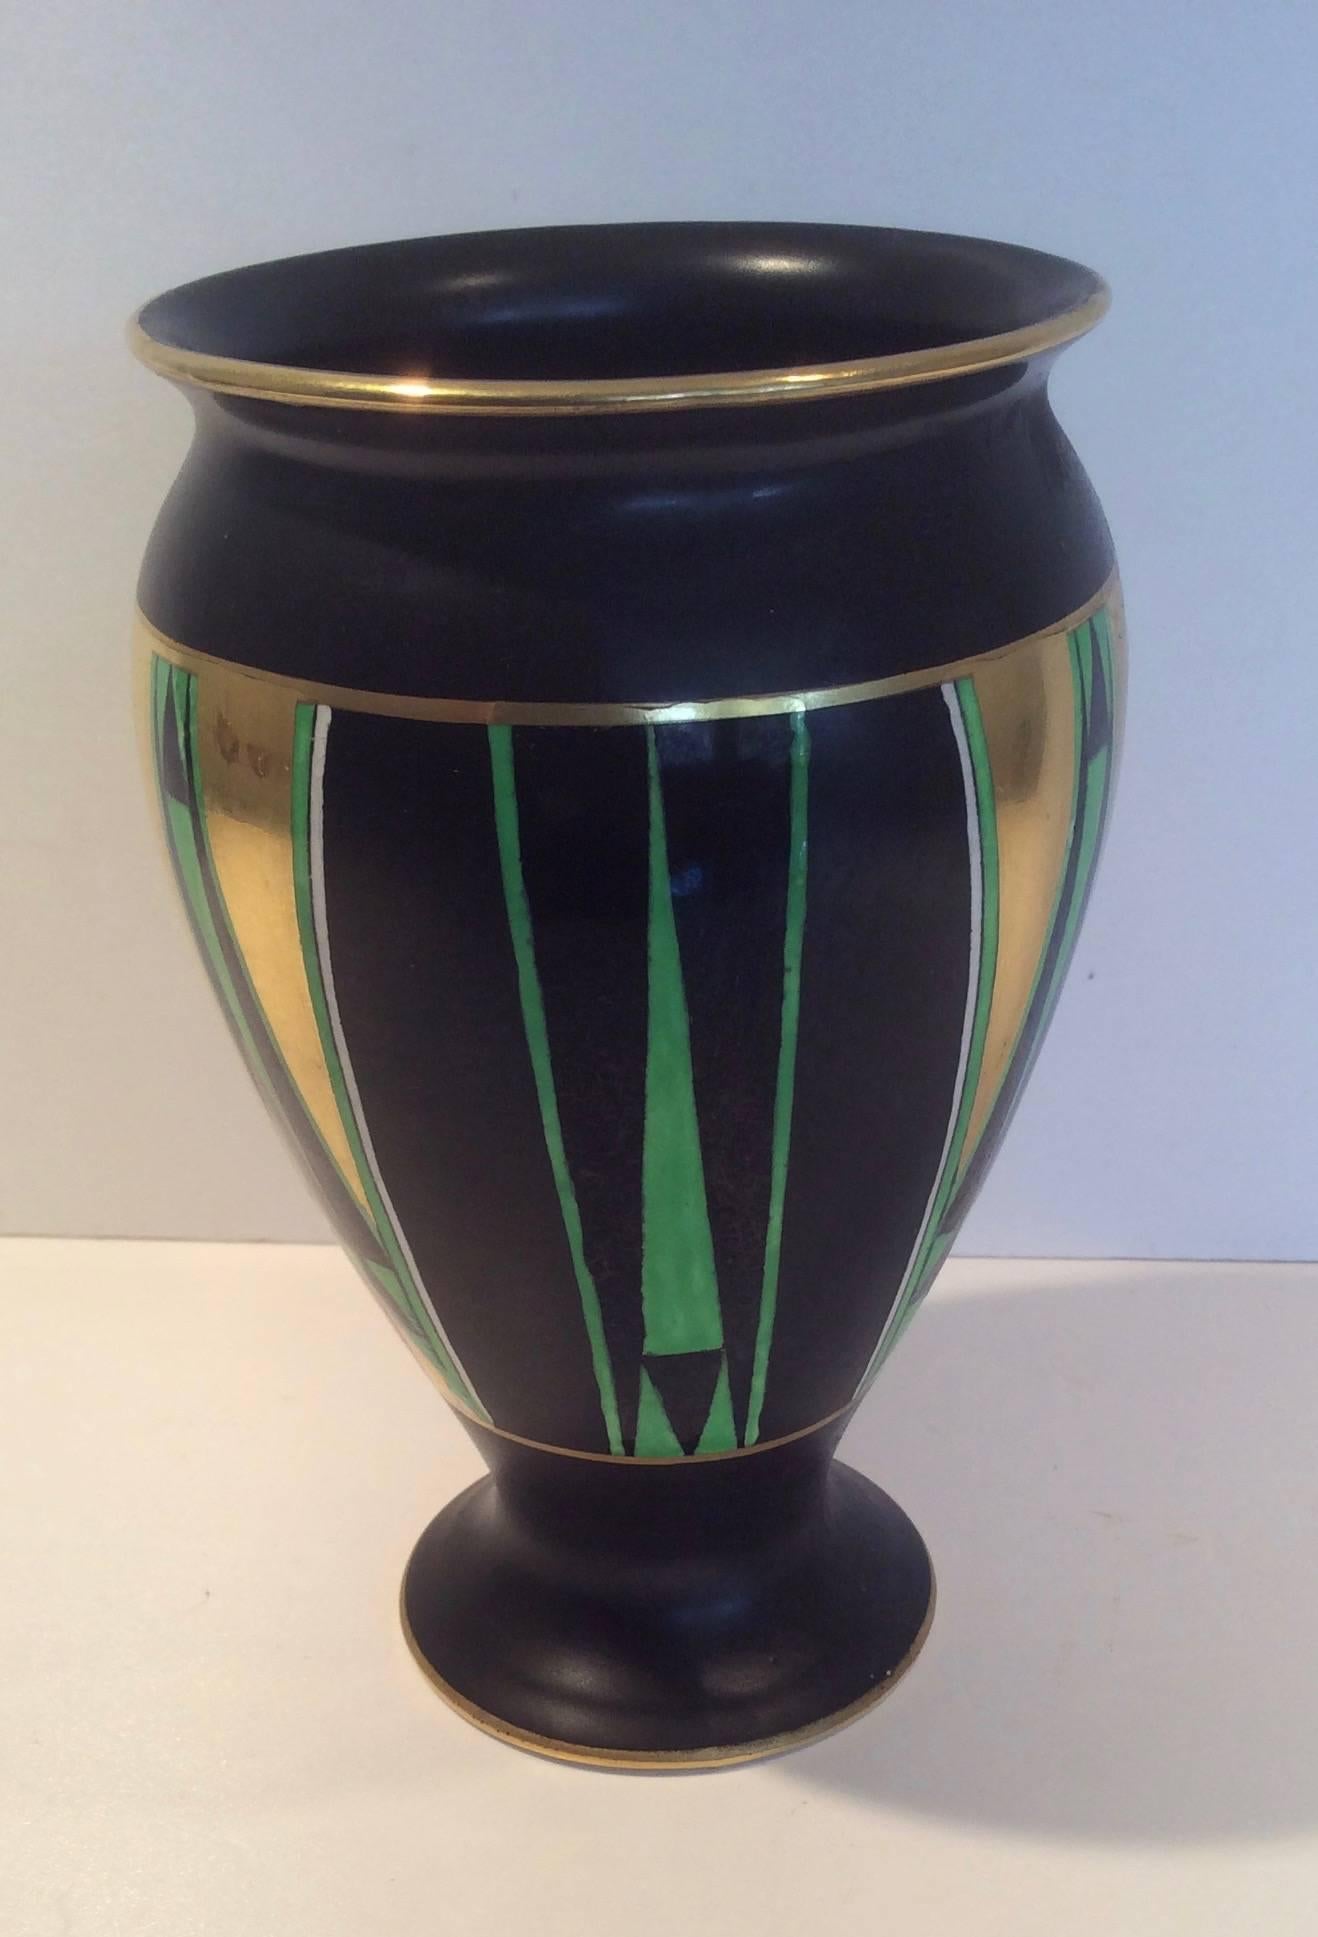 Art Deco vase.
With the stunning orient design in green, orange and black enamels with 22-carat gilding.
Measure: 16 cm h 11 cm at the widest point.
British, circa 1930.